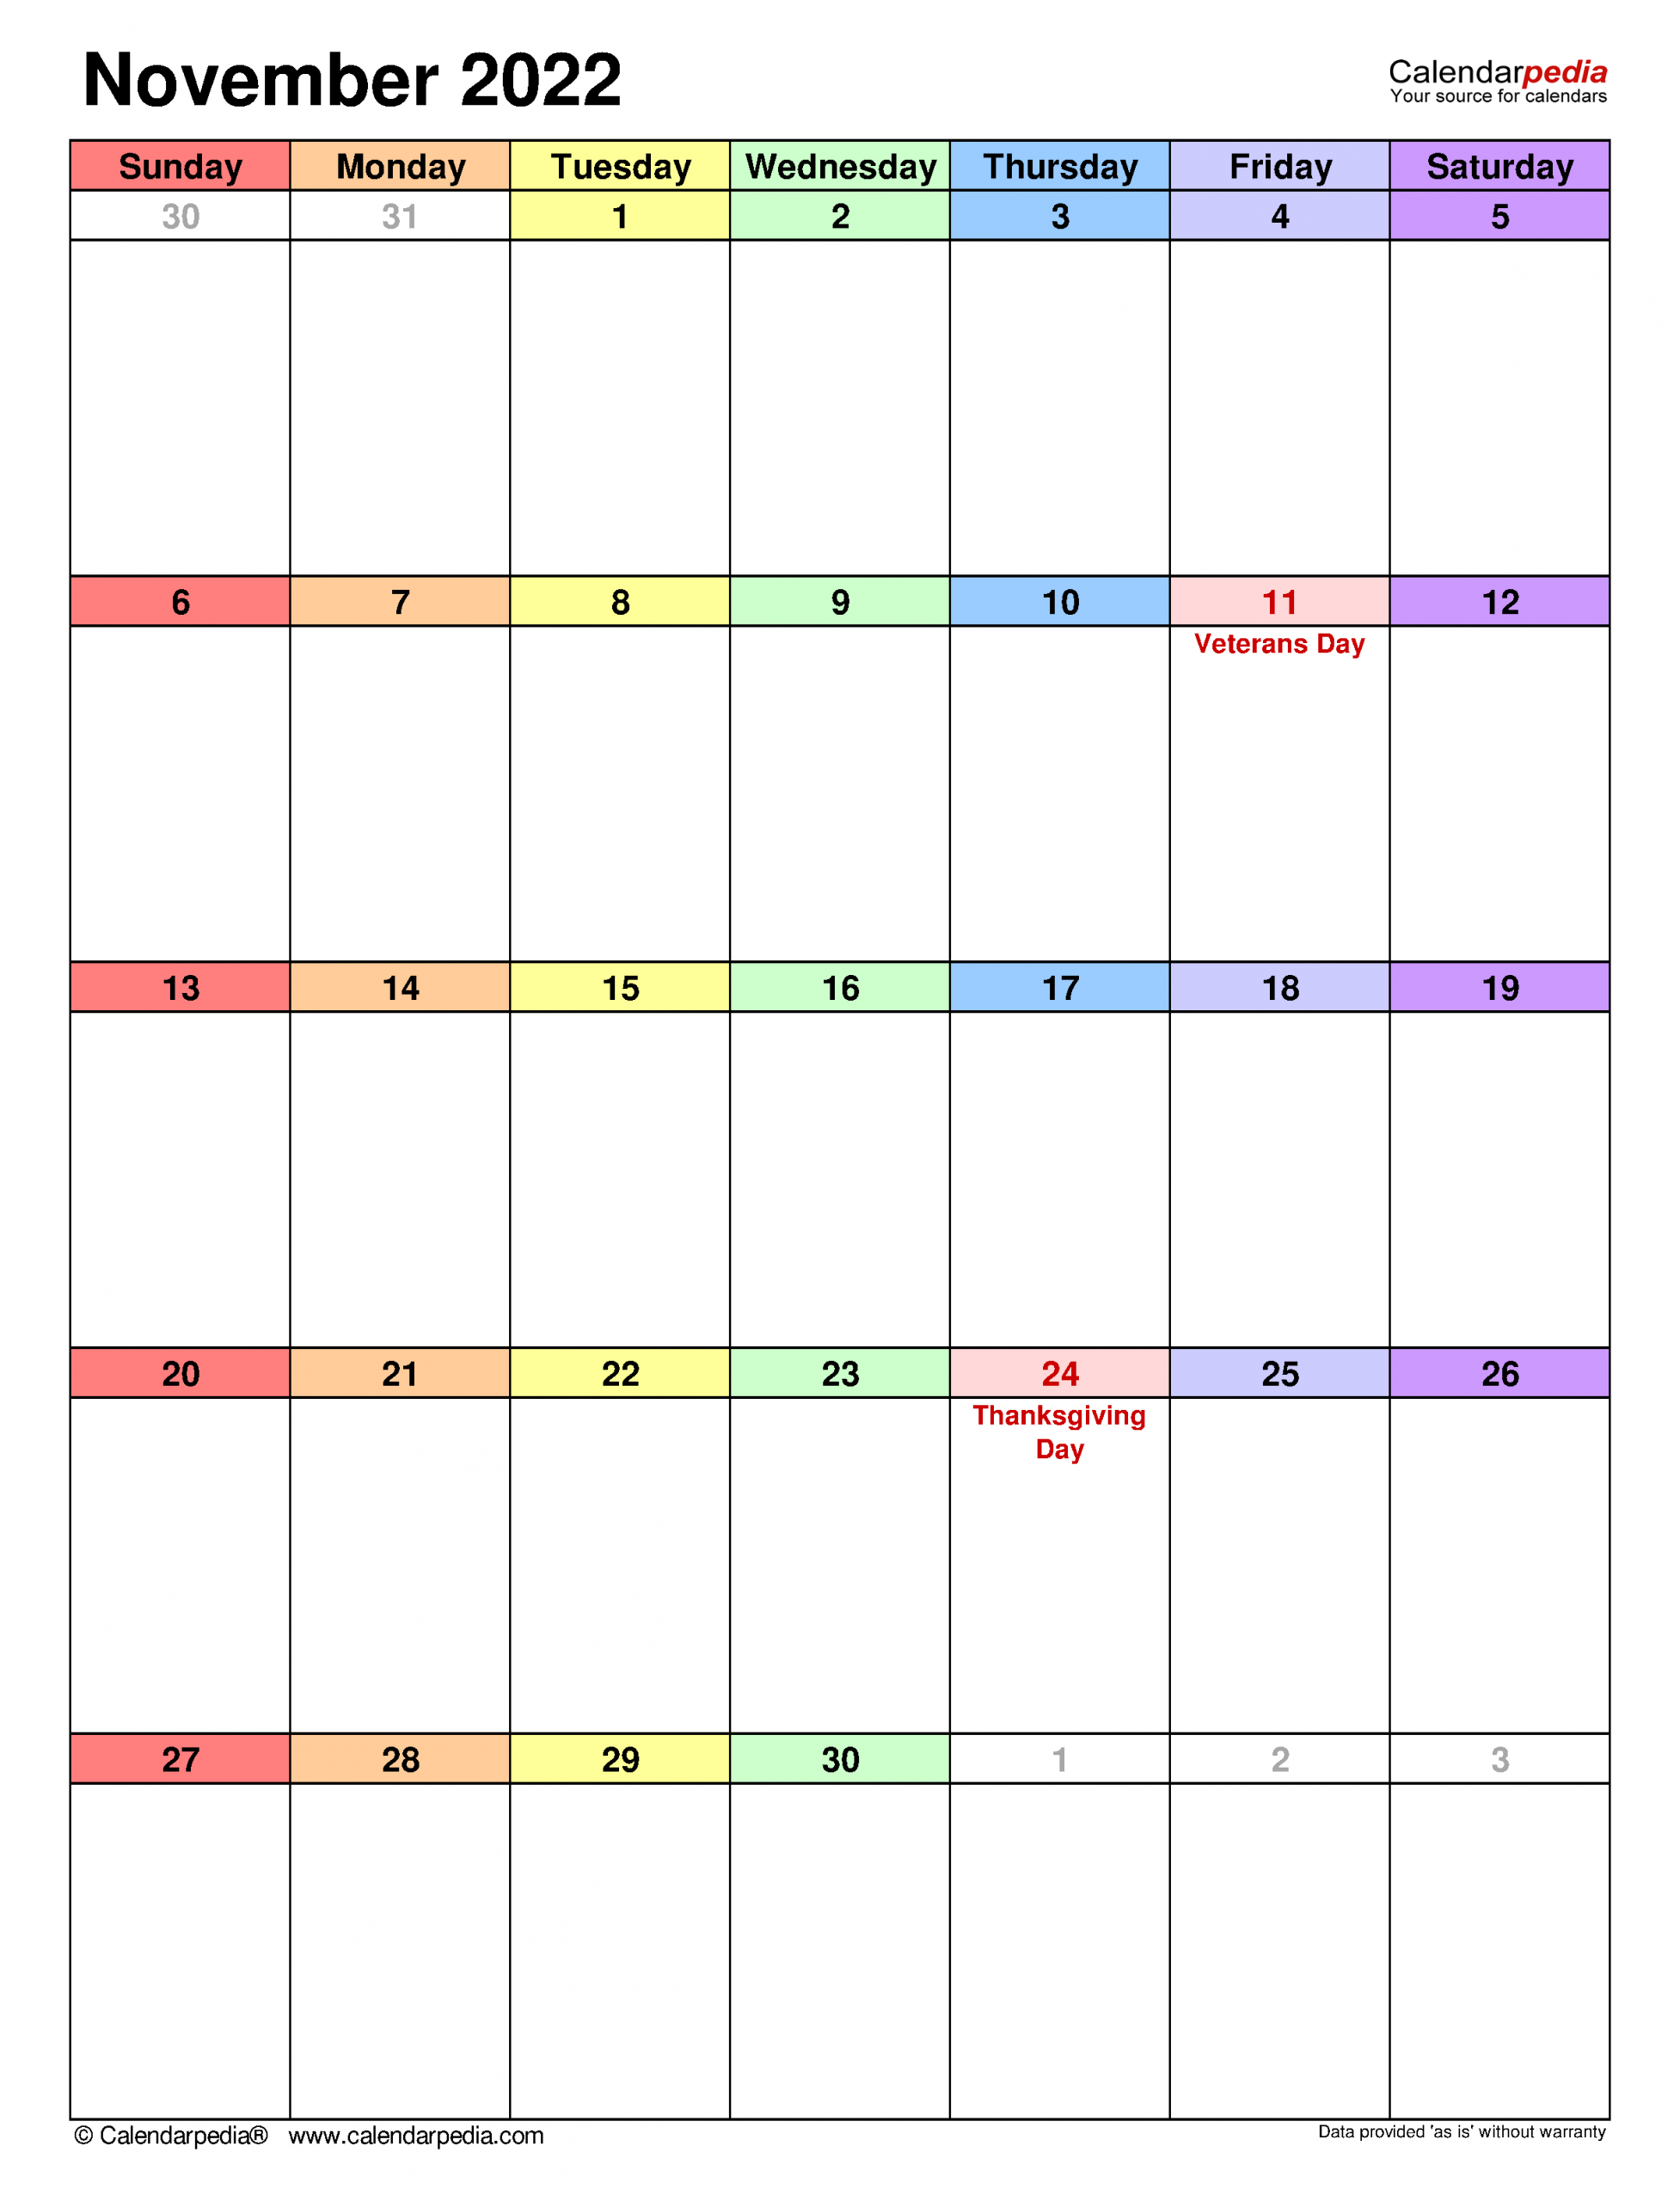 November 2022 Calendar | Templates For Word, Excel And Pdf